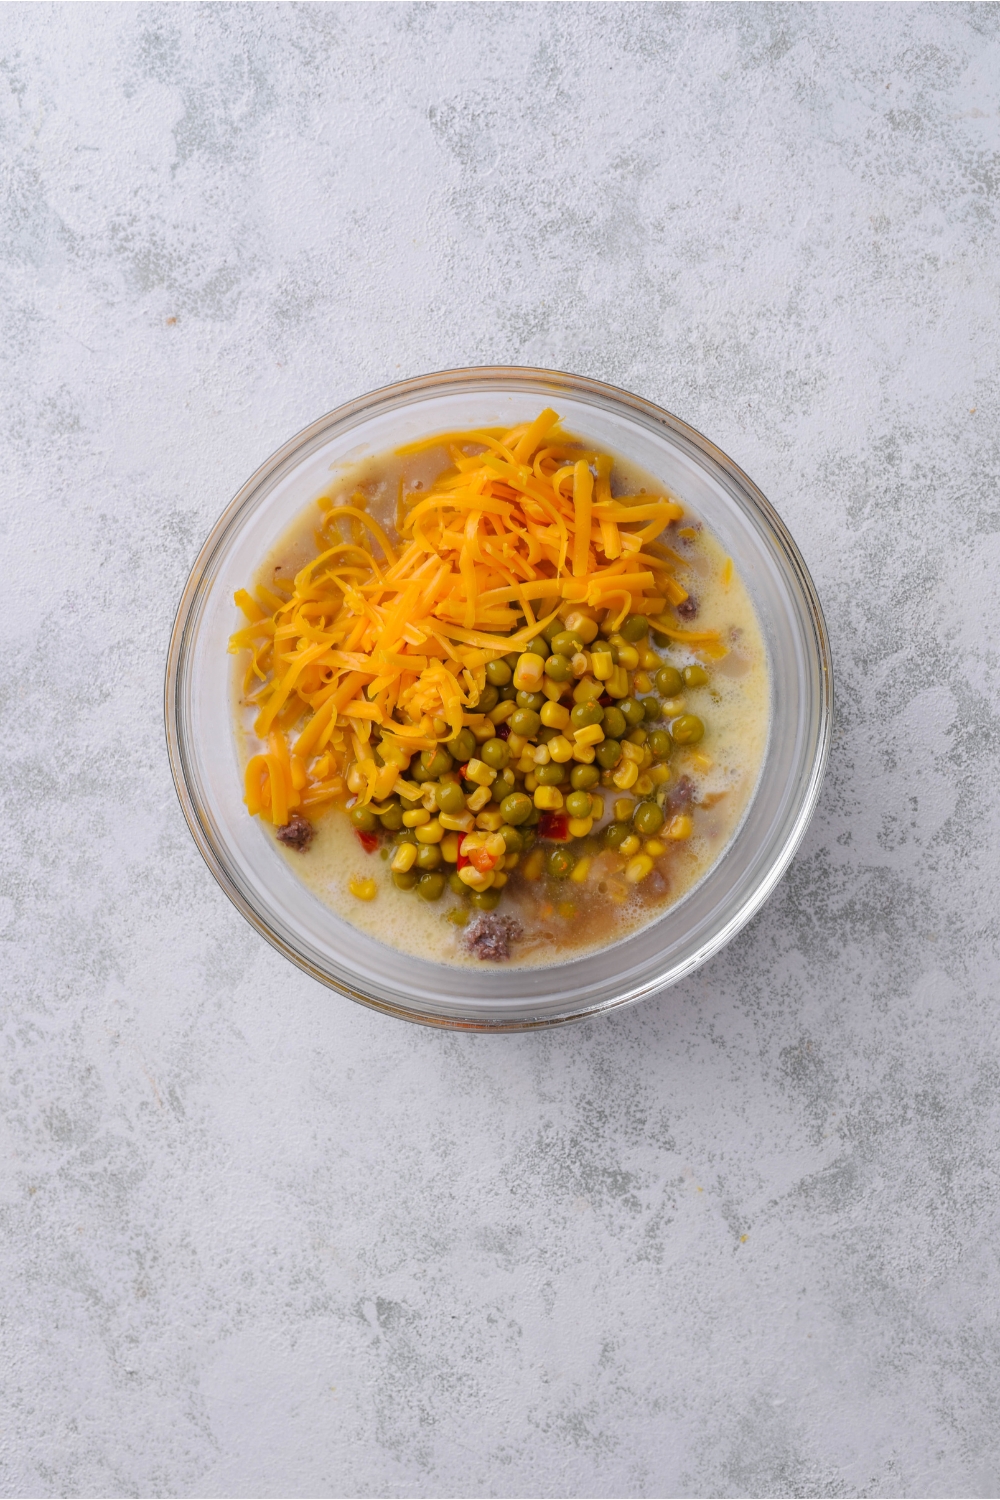 A clear bowl filled with a creamy soup mixture, mixed vegetables, and shredded cheddar cheese.